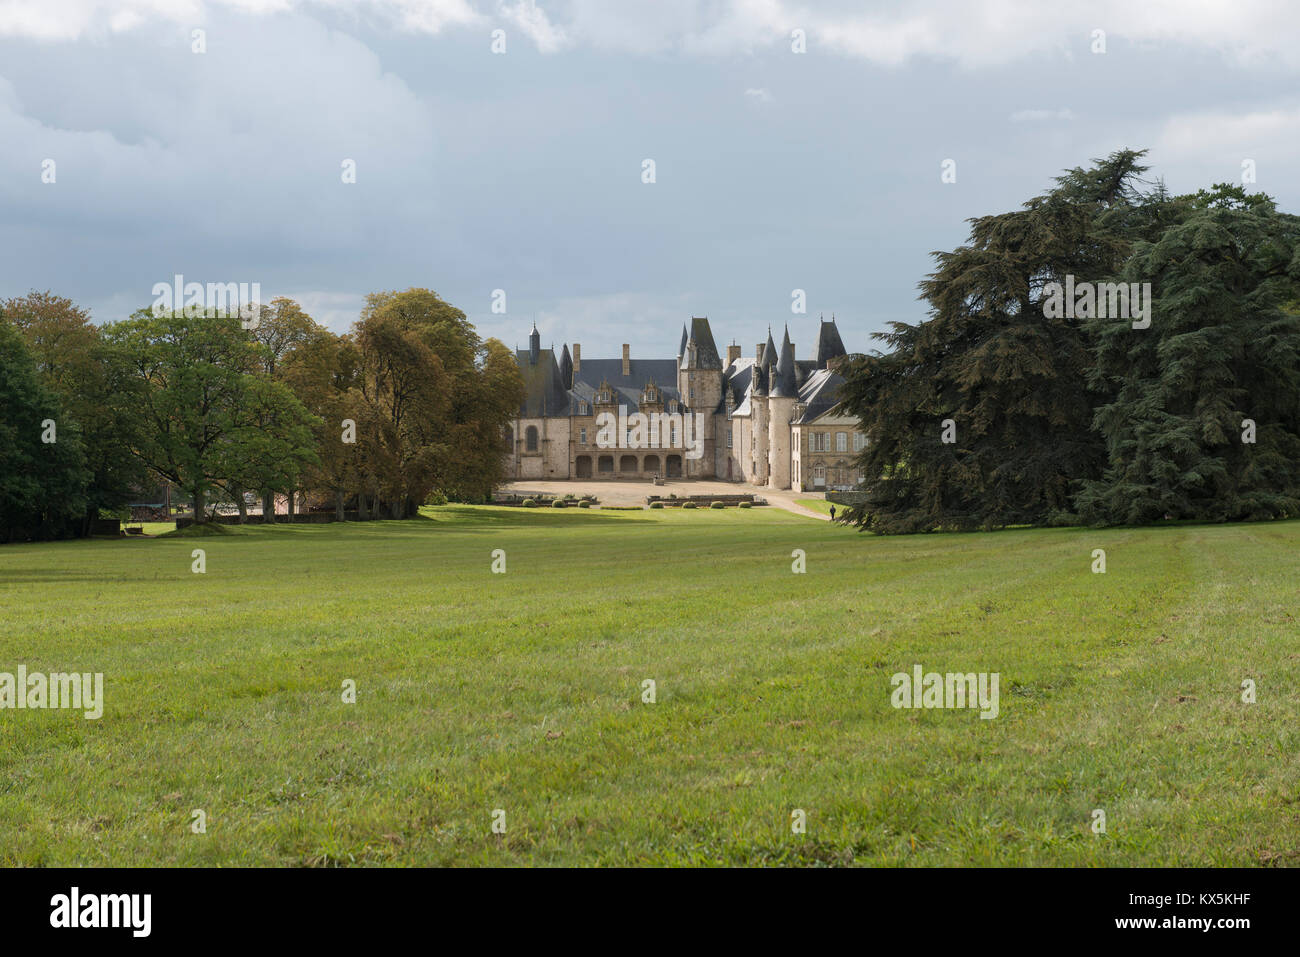 The Chateau du Rocher in the town of Mezangers in the Mayenne region of France. Stock Photo